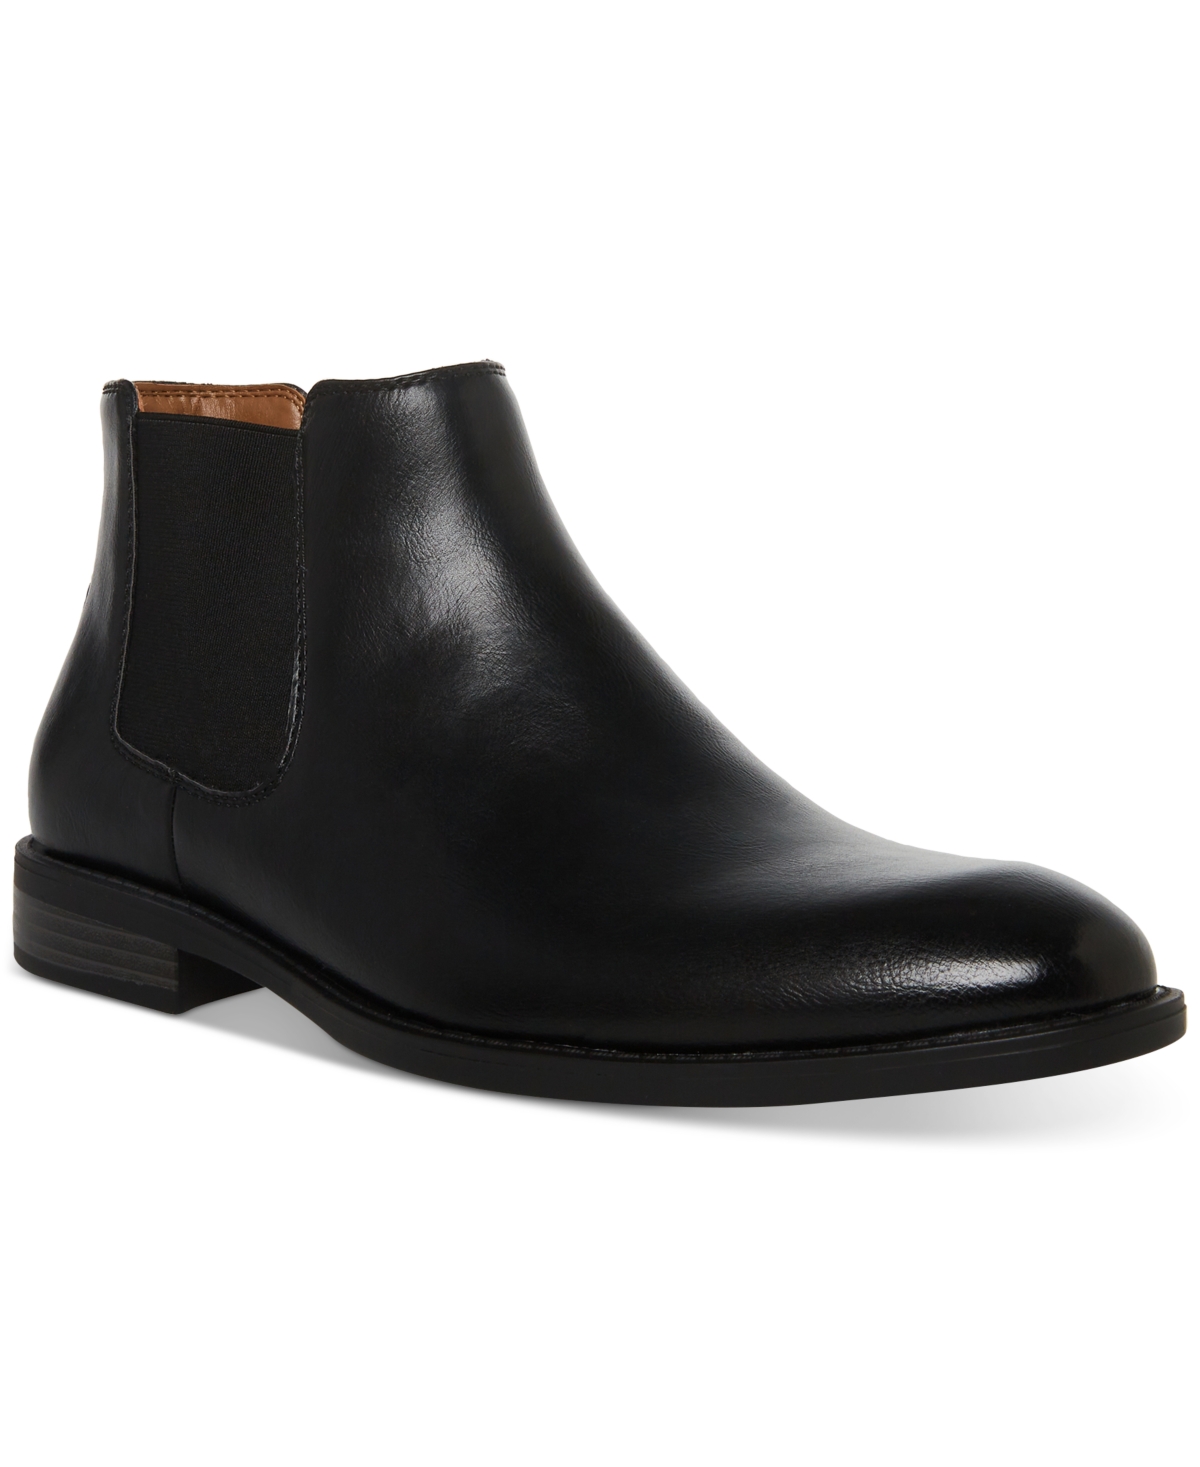 1950s Men’s Shoes | Boots, Greaser, Rockabilly Madden Men Mens Maxxin Mid Height Chelsea Boot - Black $32.99 AT vintagedancer.com